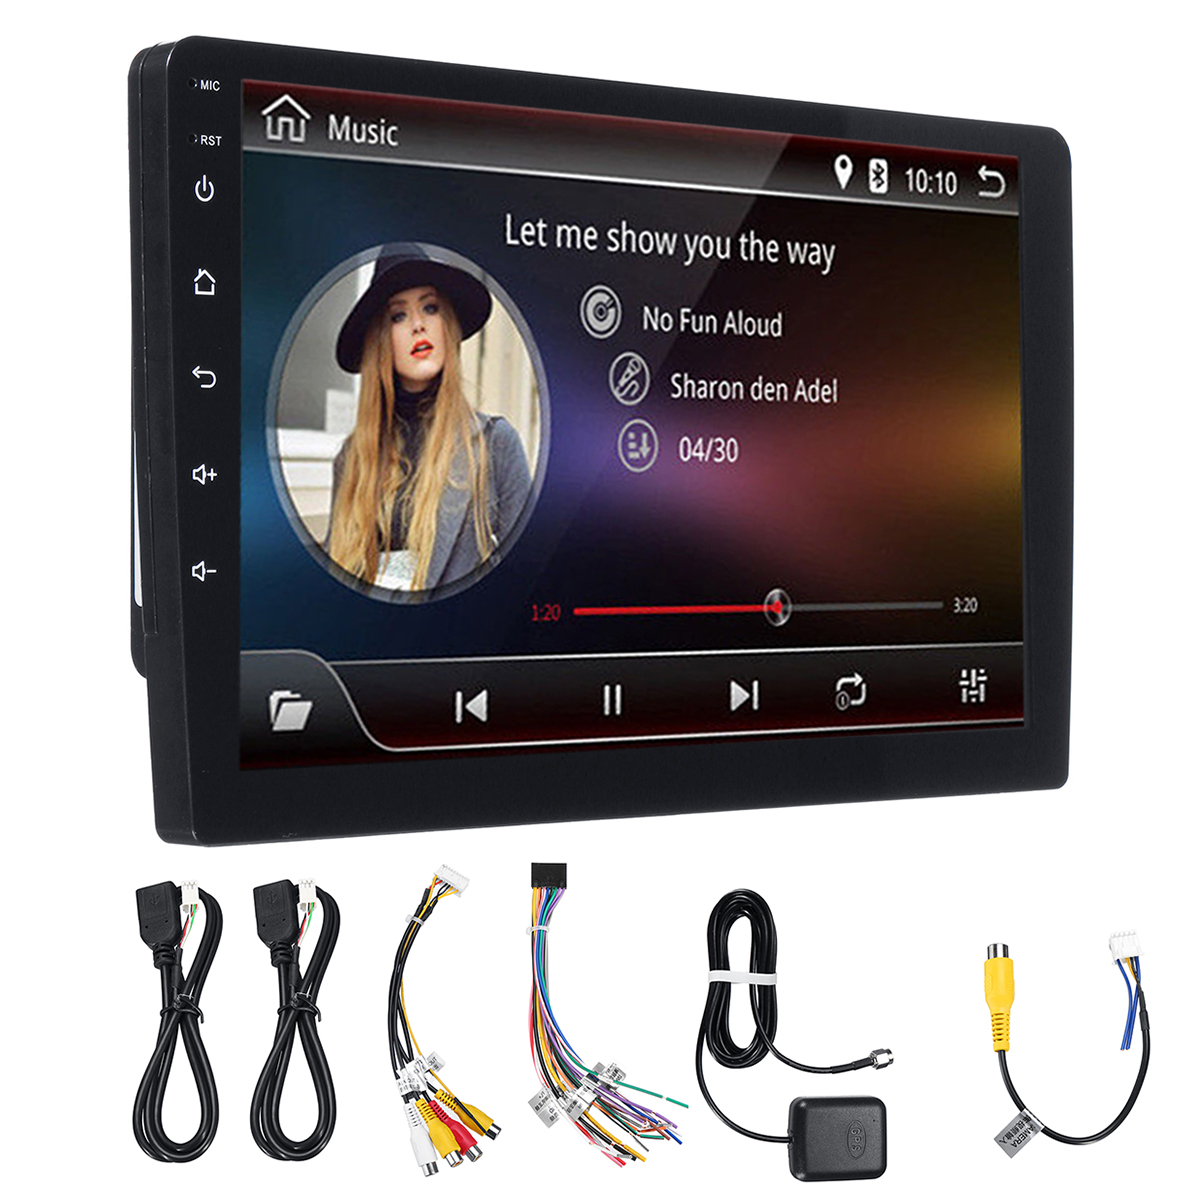 YUEHOO-9-Inch-2-DIN-for-Android-90-Car-Stereo-Radio-8-Core-432G-Touch-Screen-4G-bluetooth-FM-AM-RDS--1562572